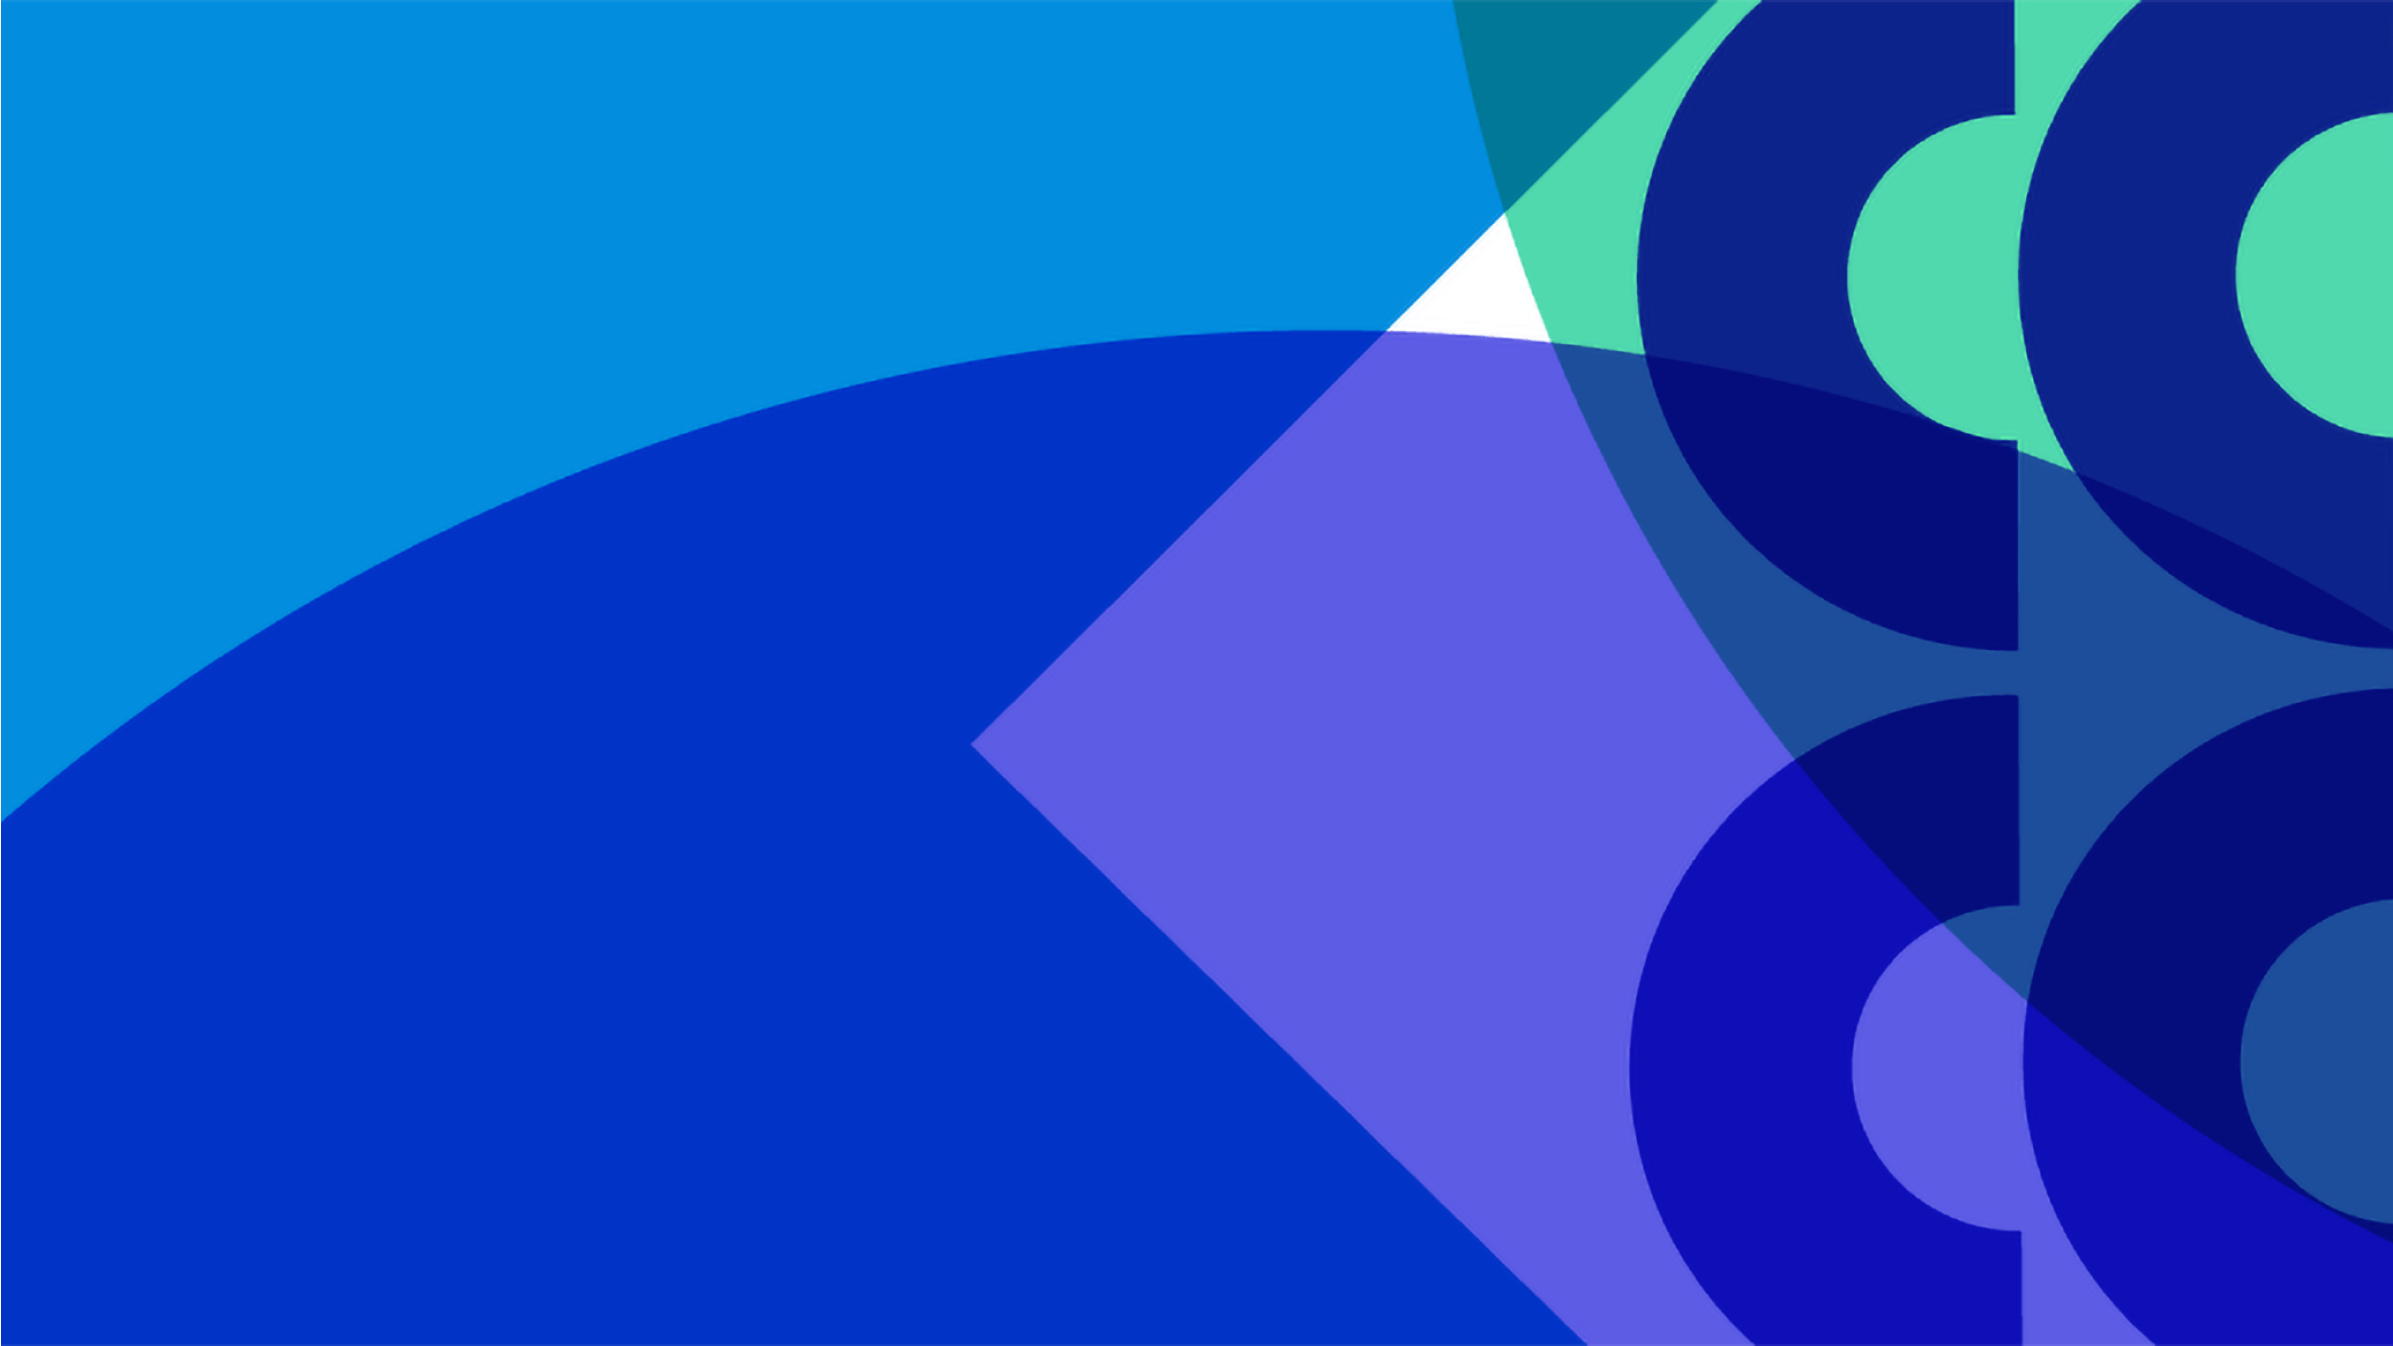 An abstract image in purples and blues featuring overlapping shapes and a series of noughts.